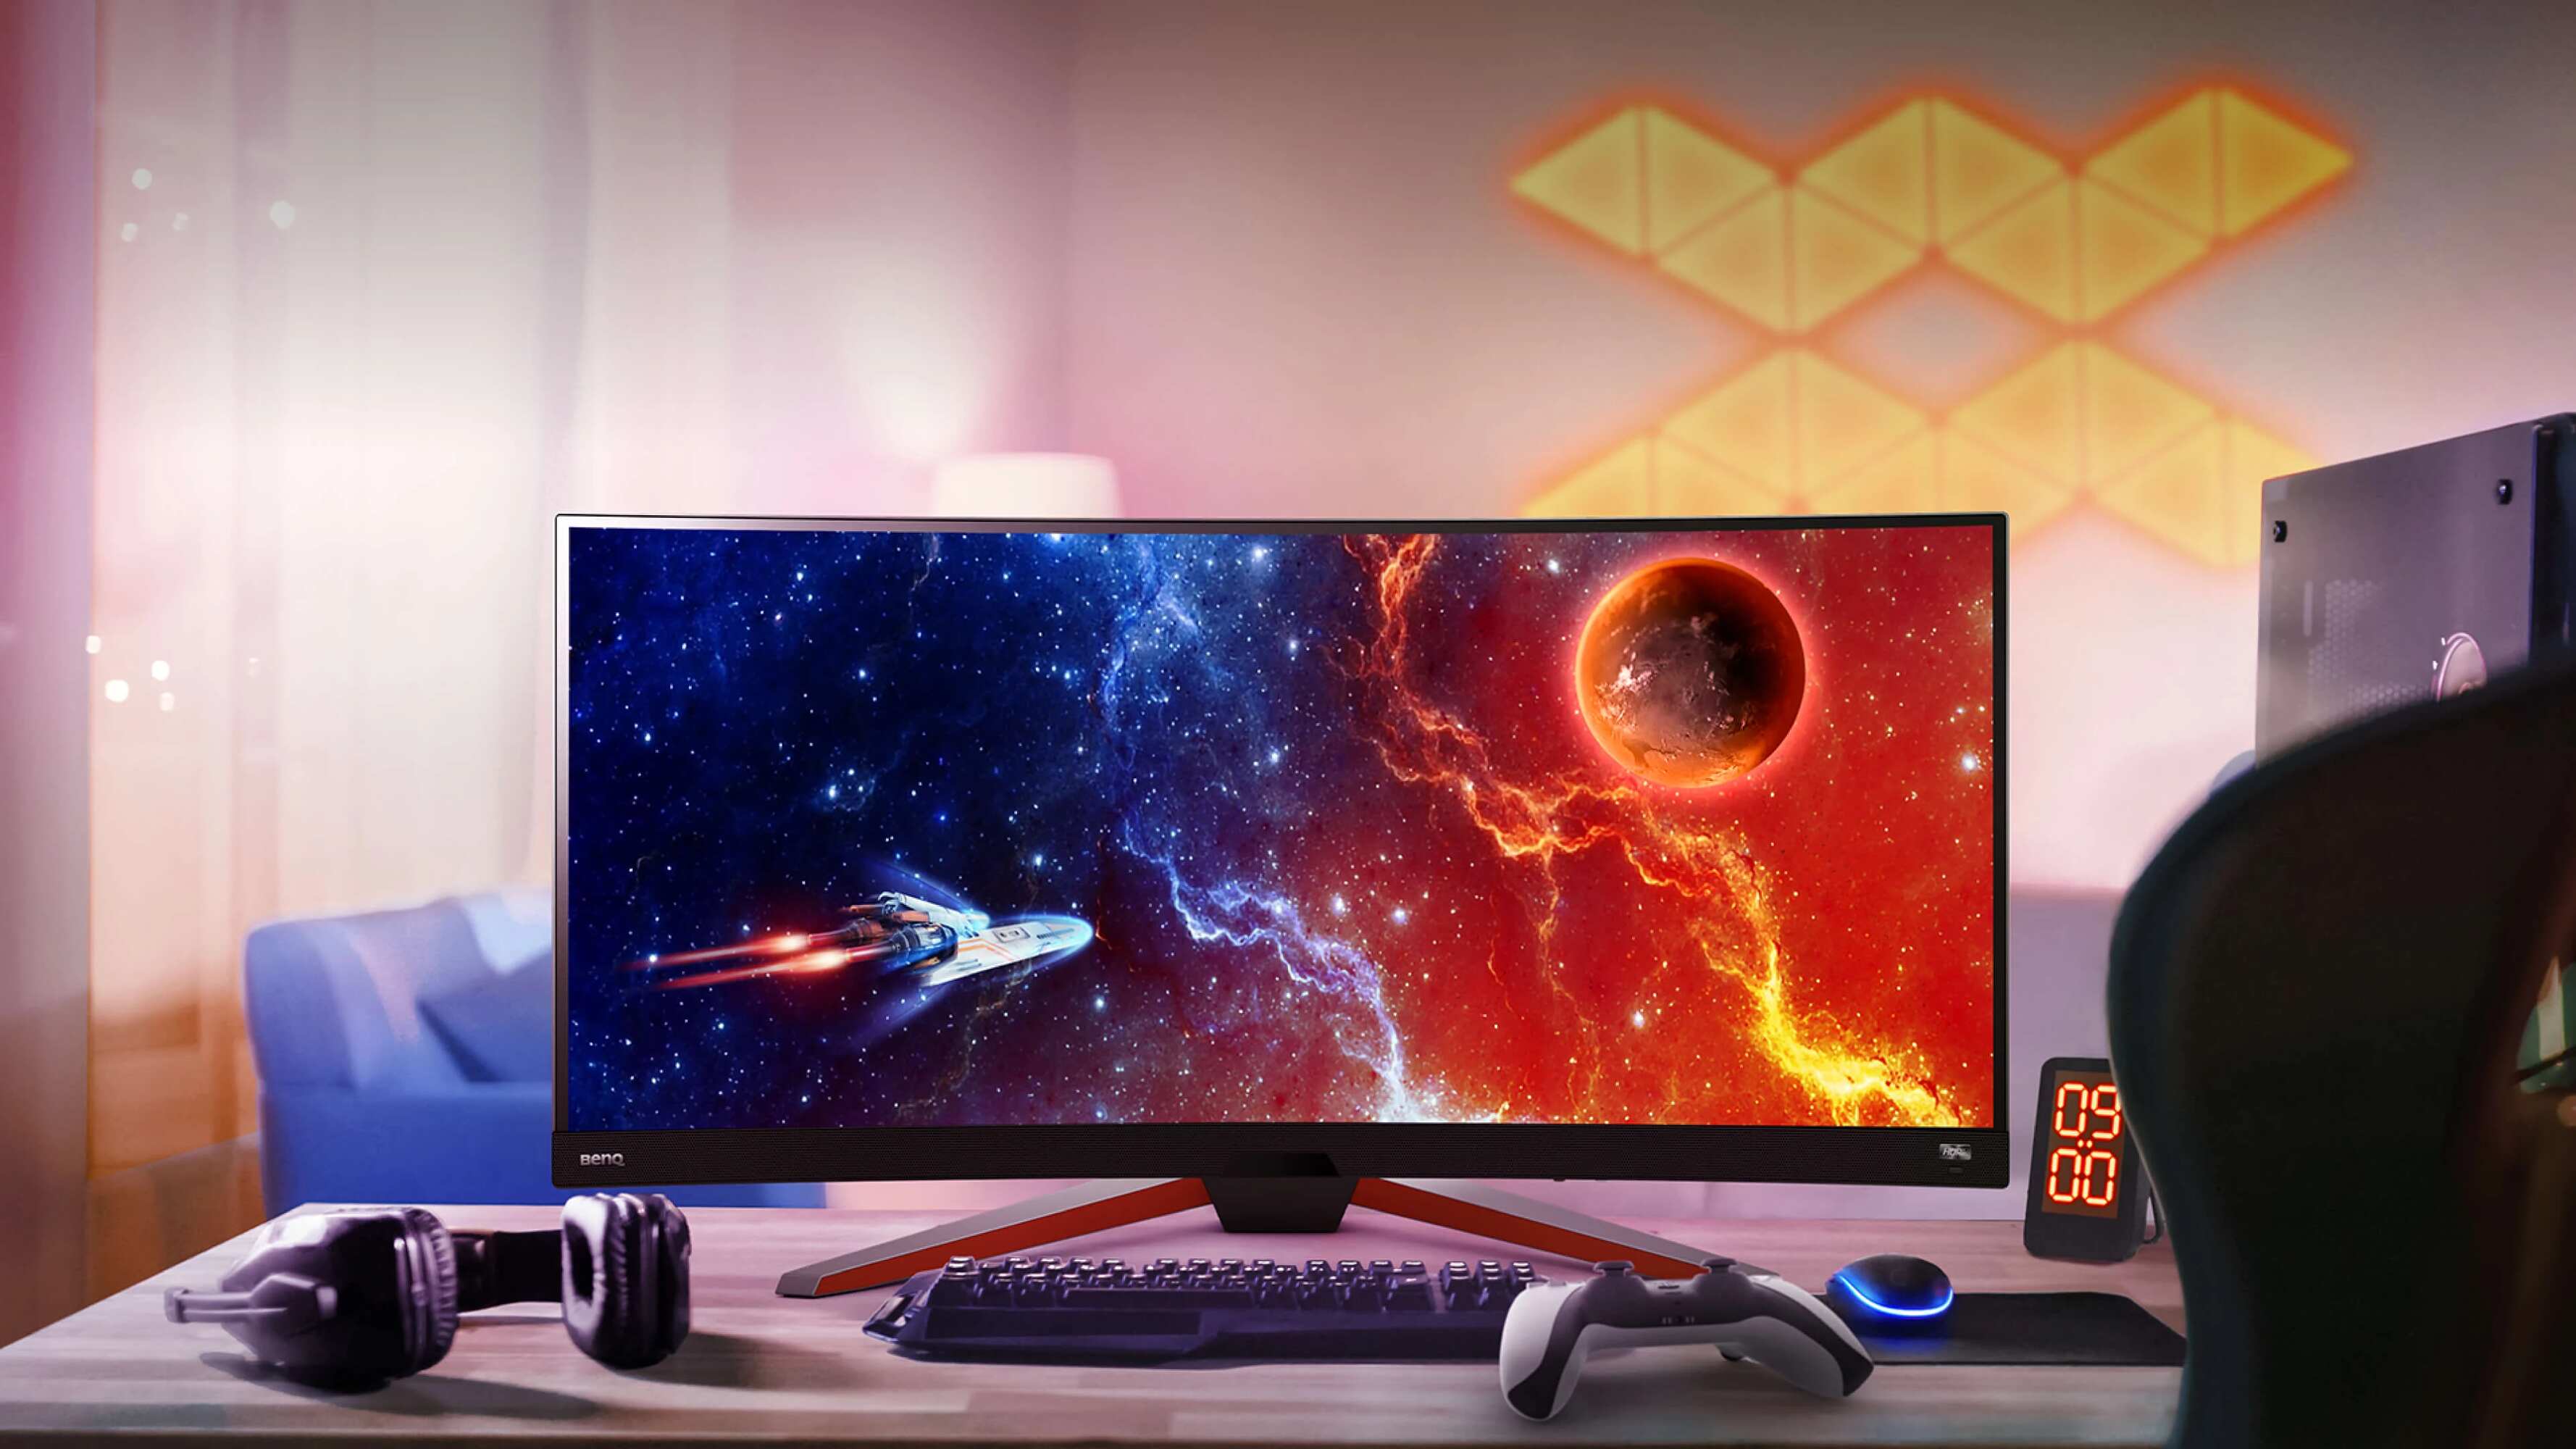 Where Are The Settings For BenQ XR Curved Gaming Monitor?